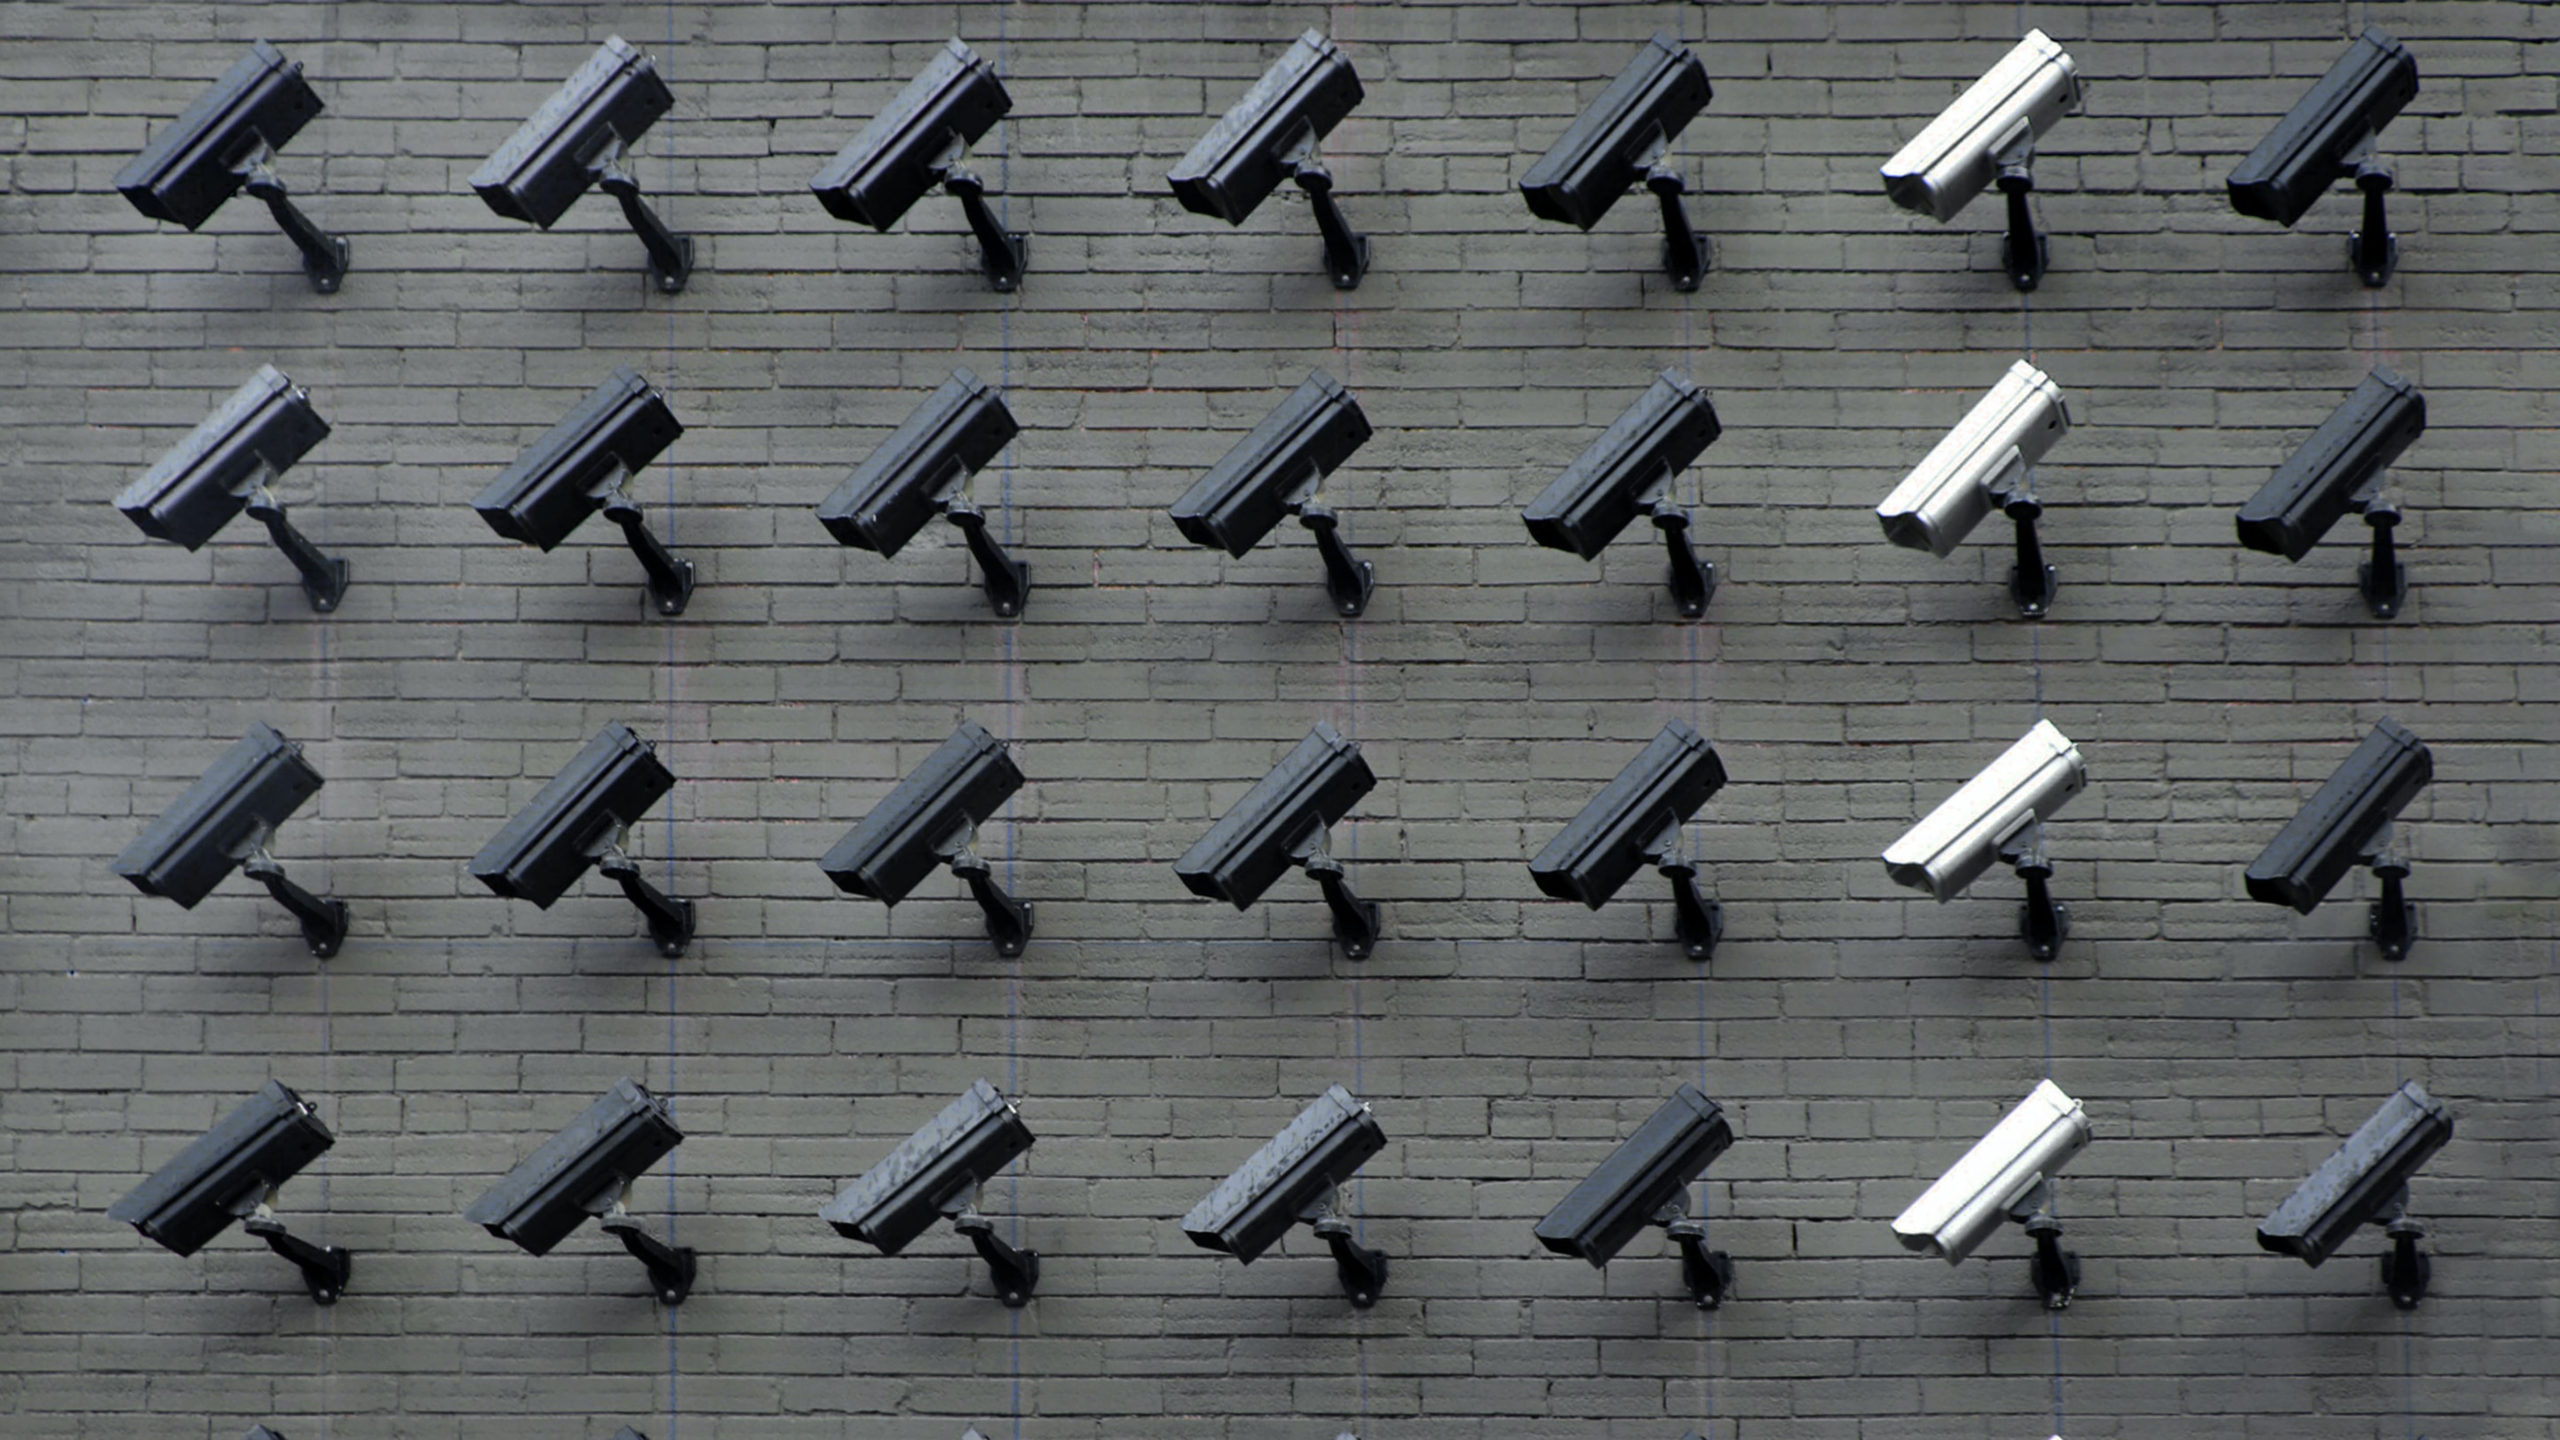 Debating Privacy in Public in the Age of Surveillance